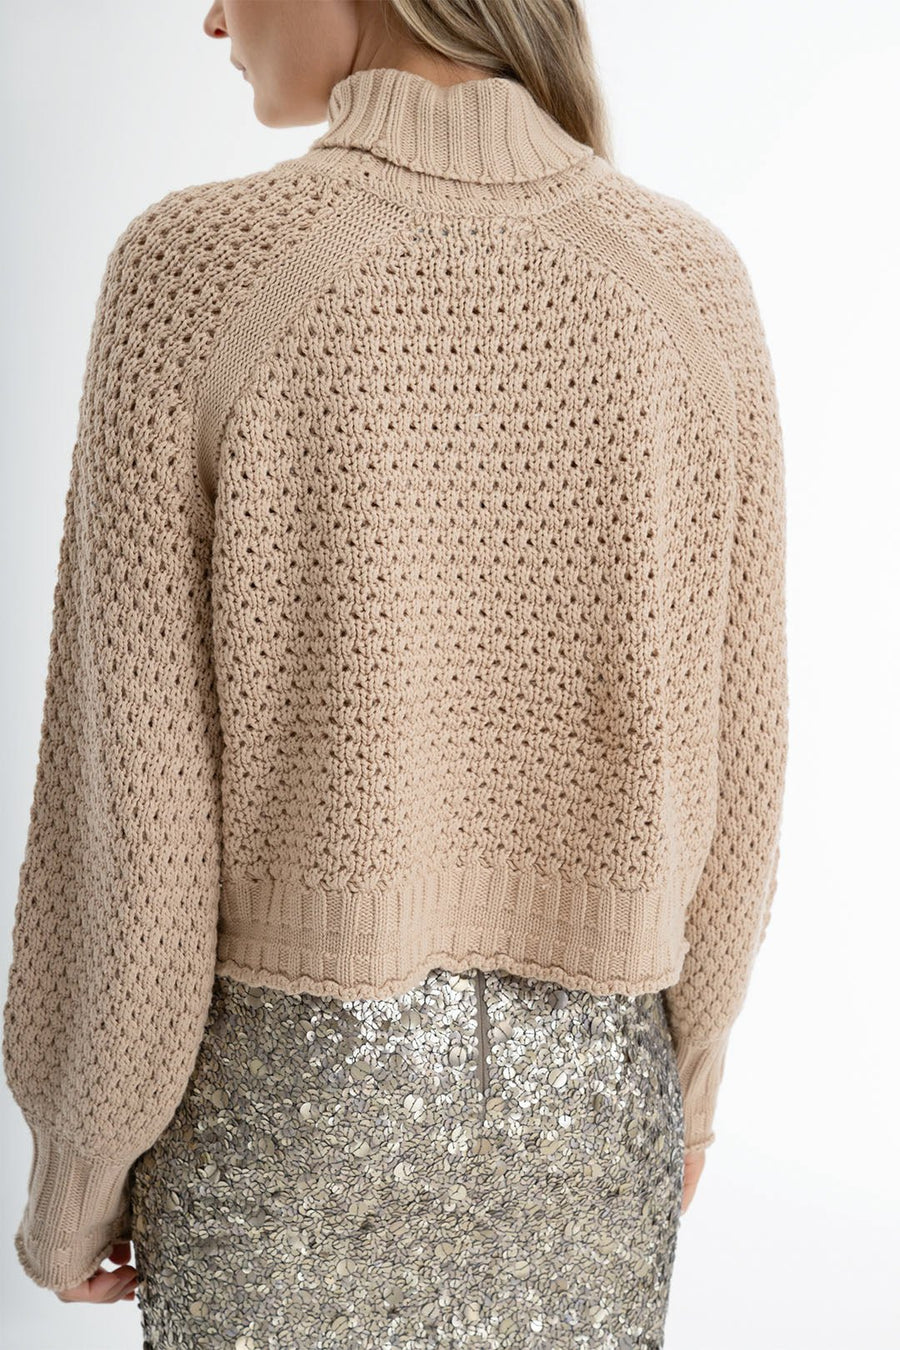 HONEYCOMB CROPPED TURTLENECK SWEATER, POWDER - Burning Torch Online Boutique